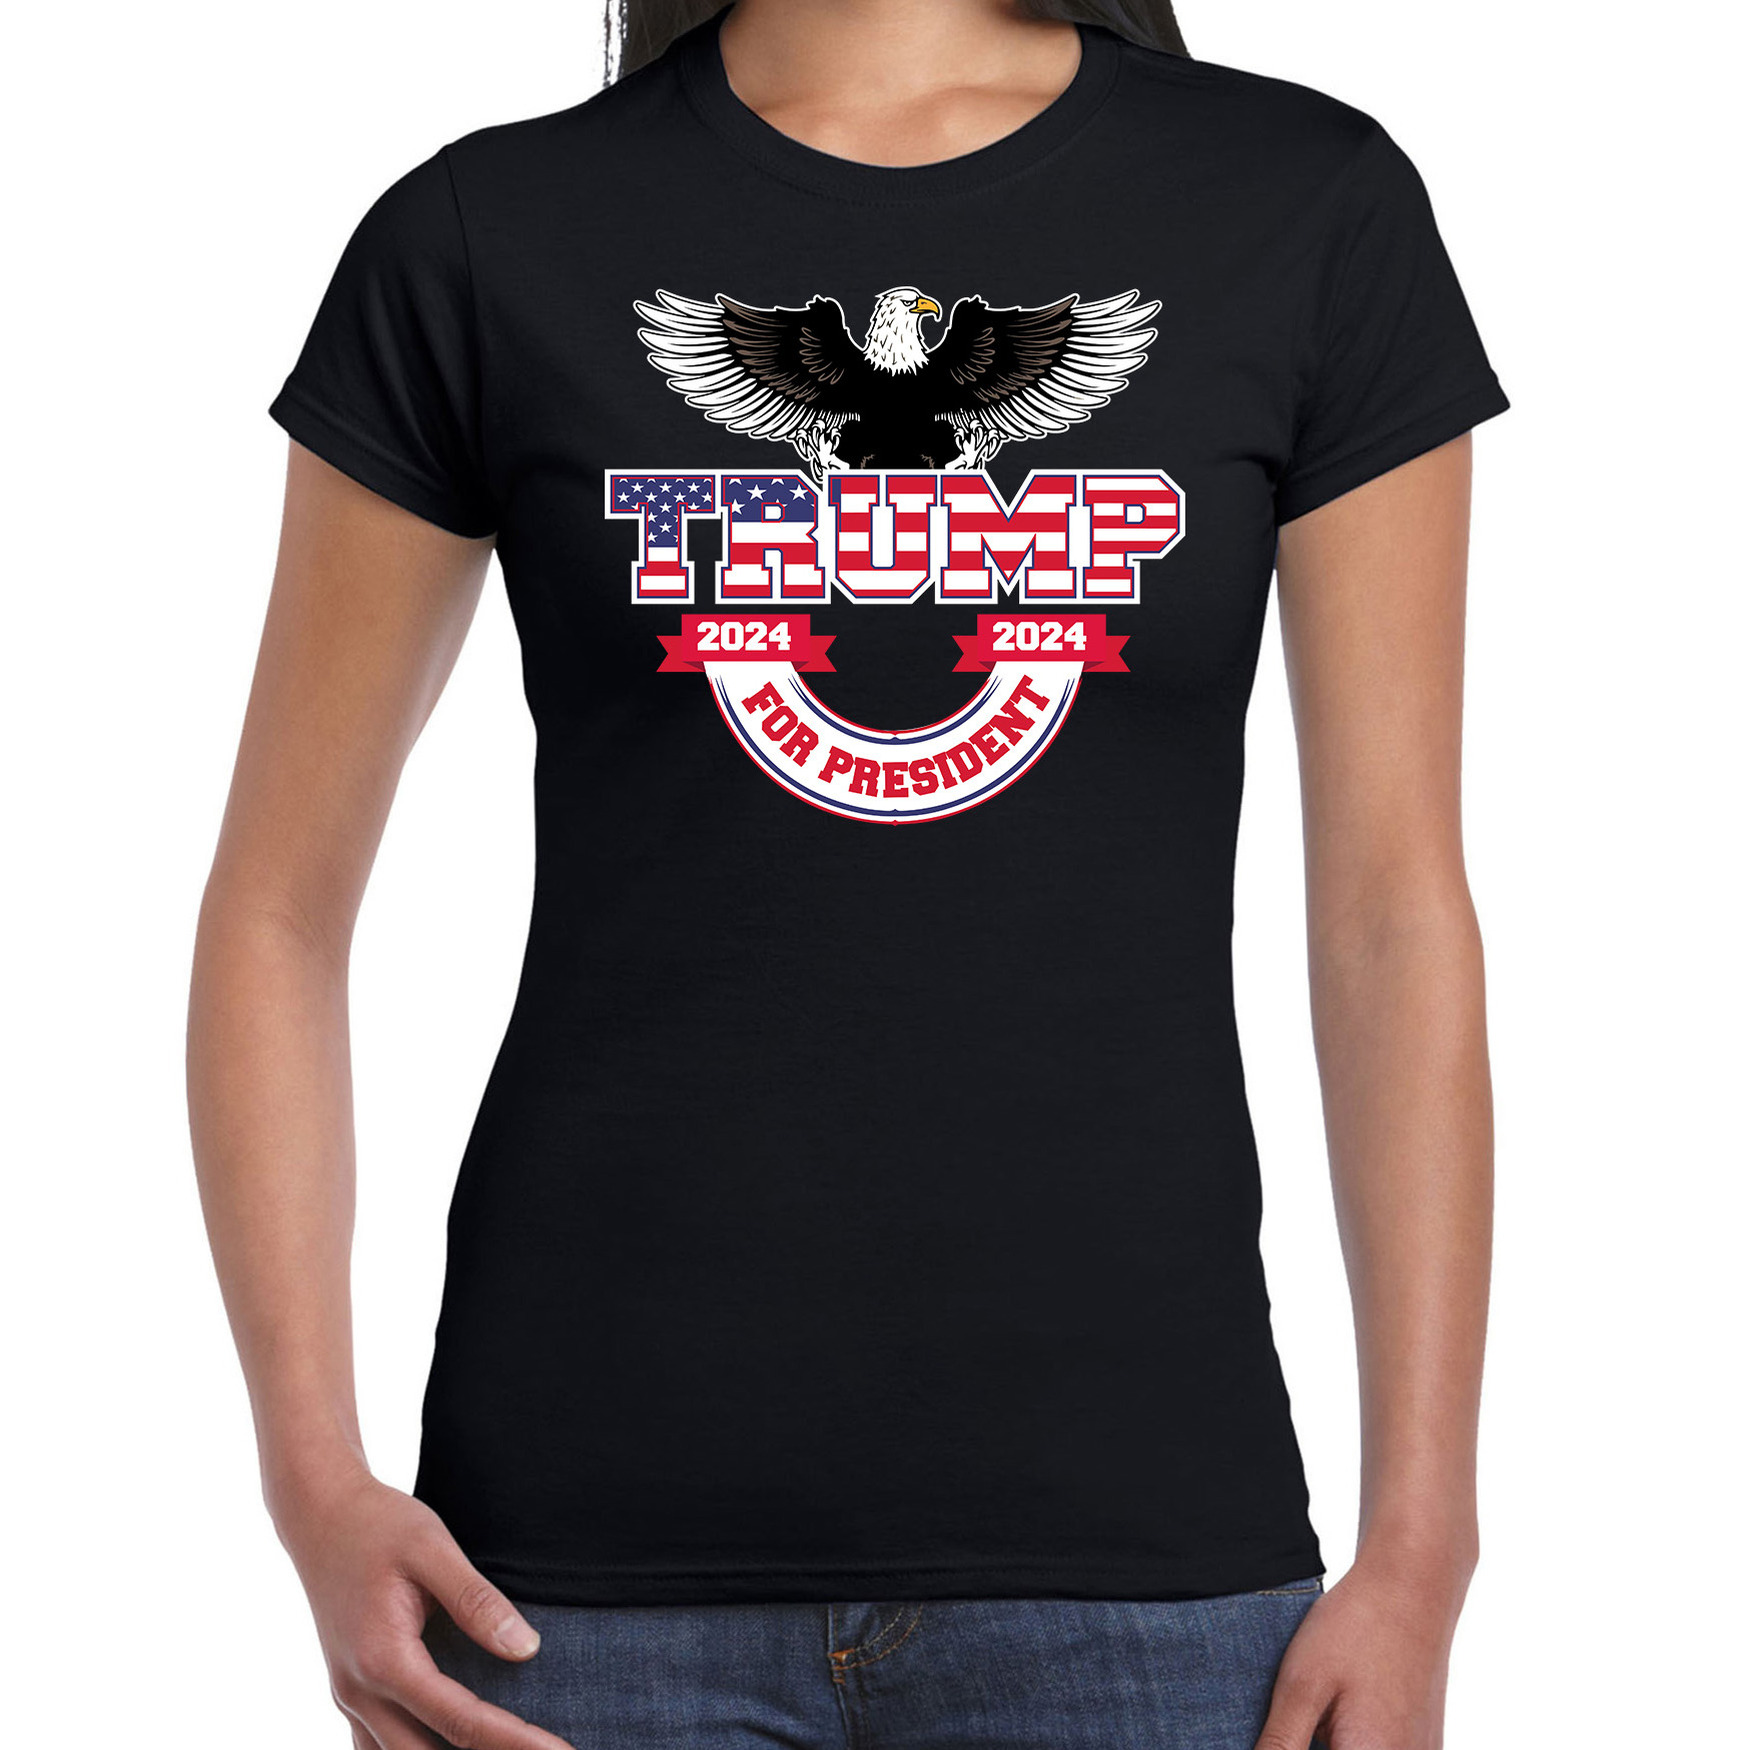 T-shirt Trump dames - American eagle - fout/grappig voor carnaval M -